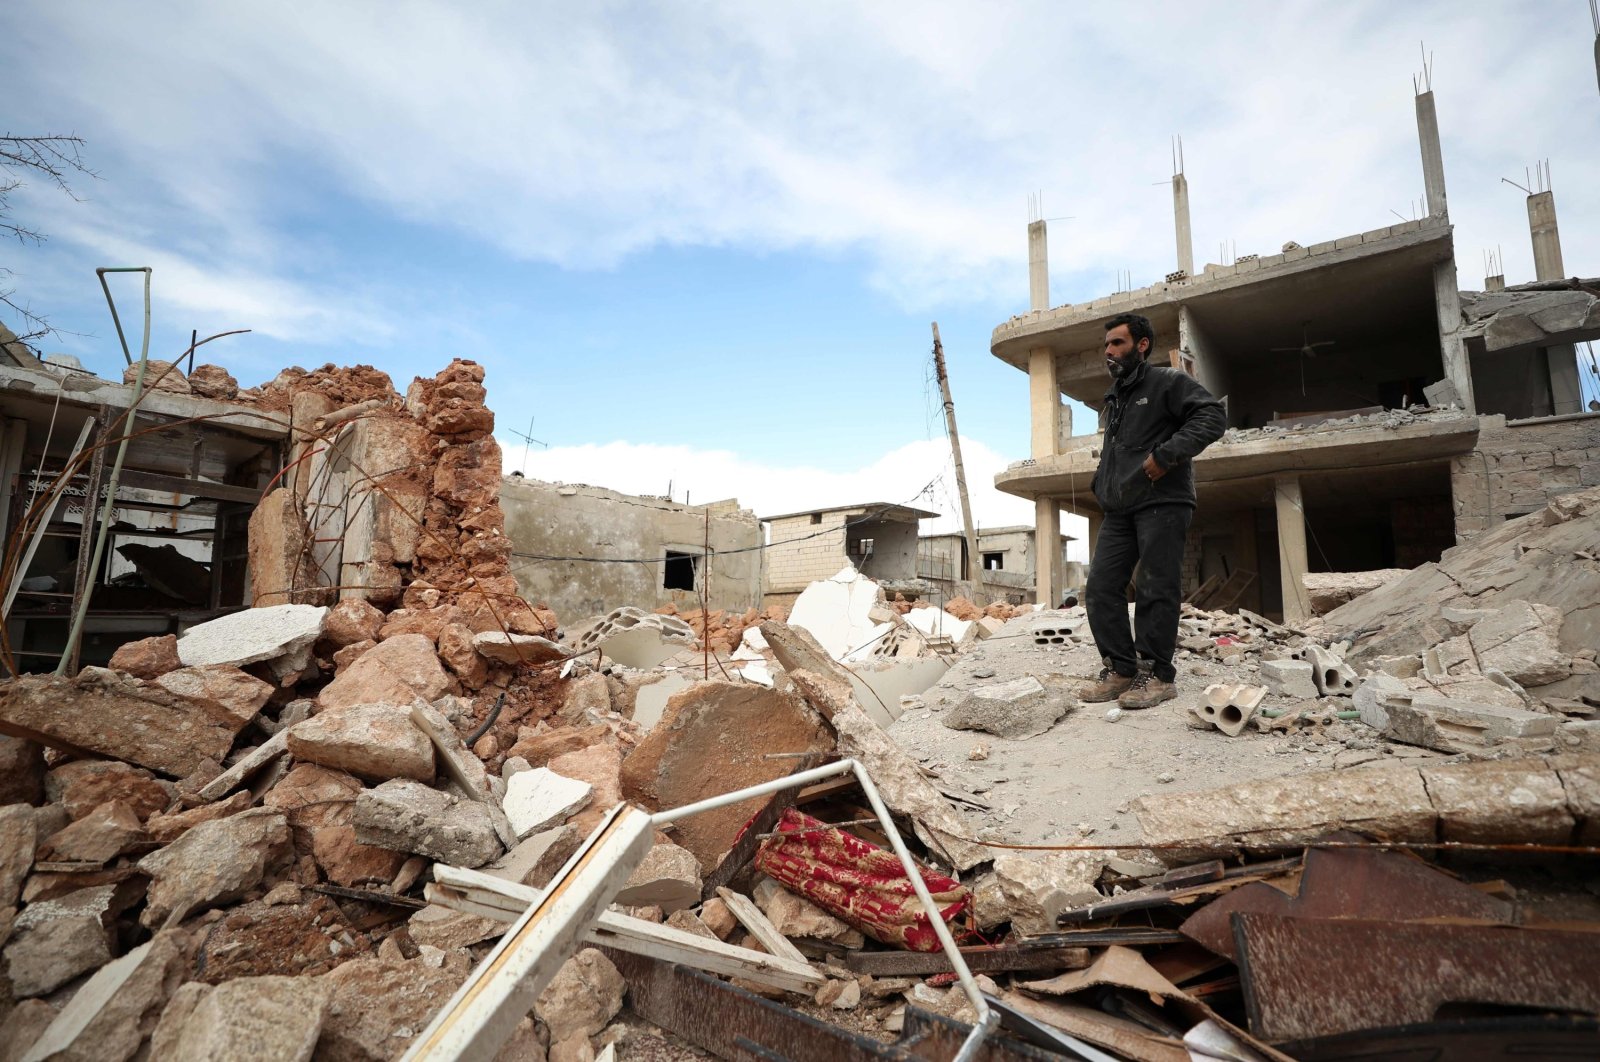 A man stands amid the rubble of a destroyed building in the town of Saraqib, in the northwestern province of Idlib, Syria, Jan. 31, 2020. (AFP Photo)